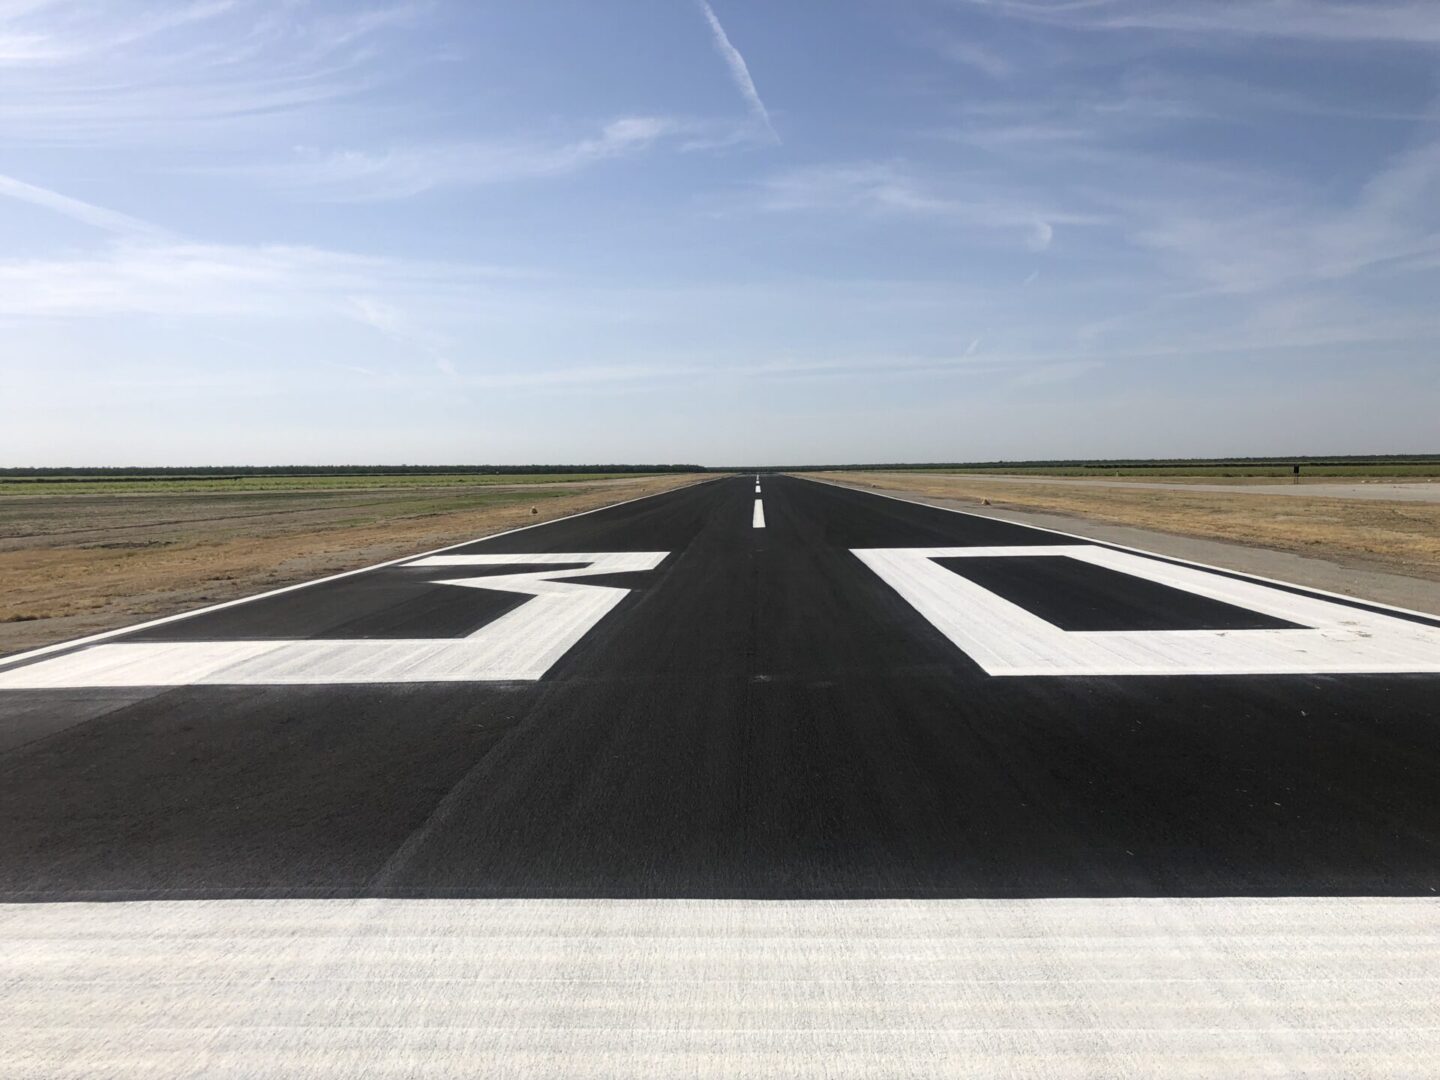 Wasco Airport ground with white markings